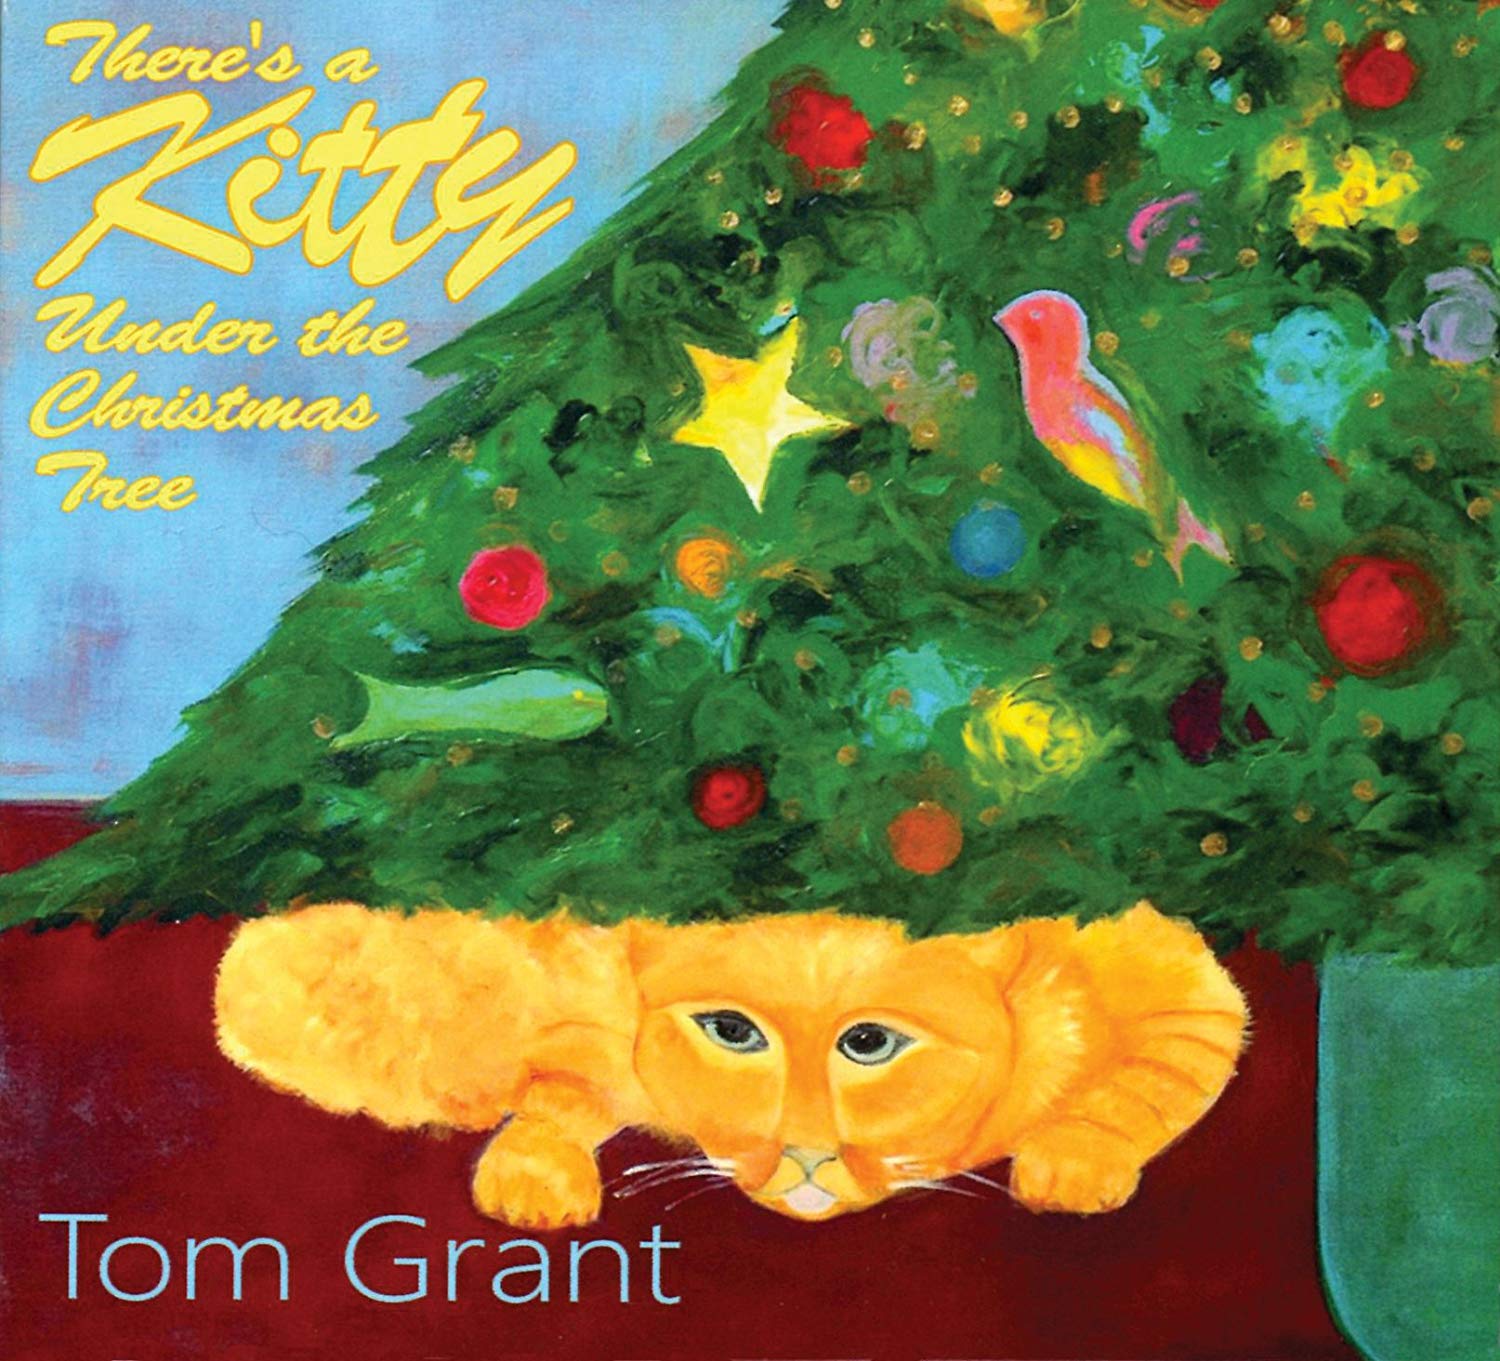 TOM GRANT - There's a Kitty Under the Christmas Tree cover 